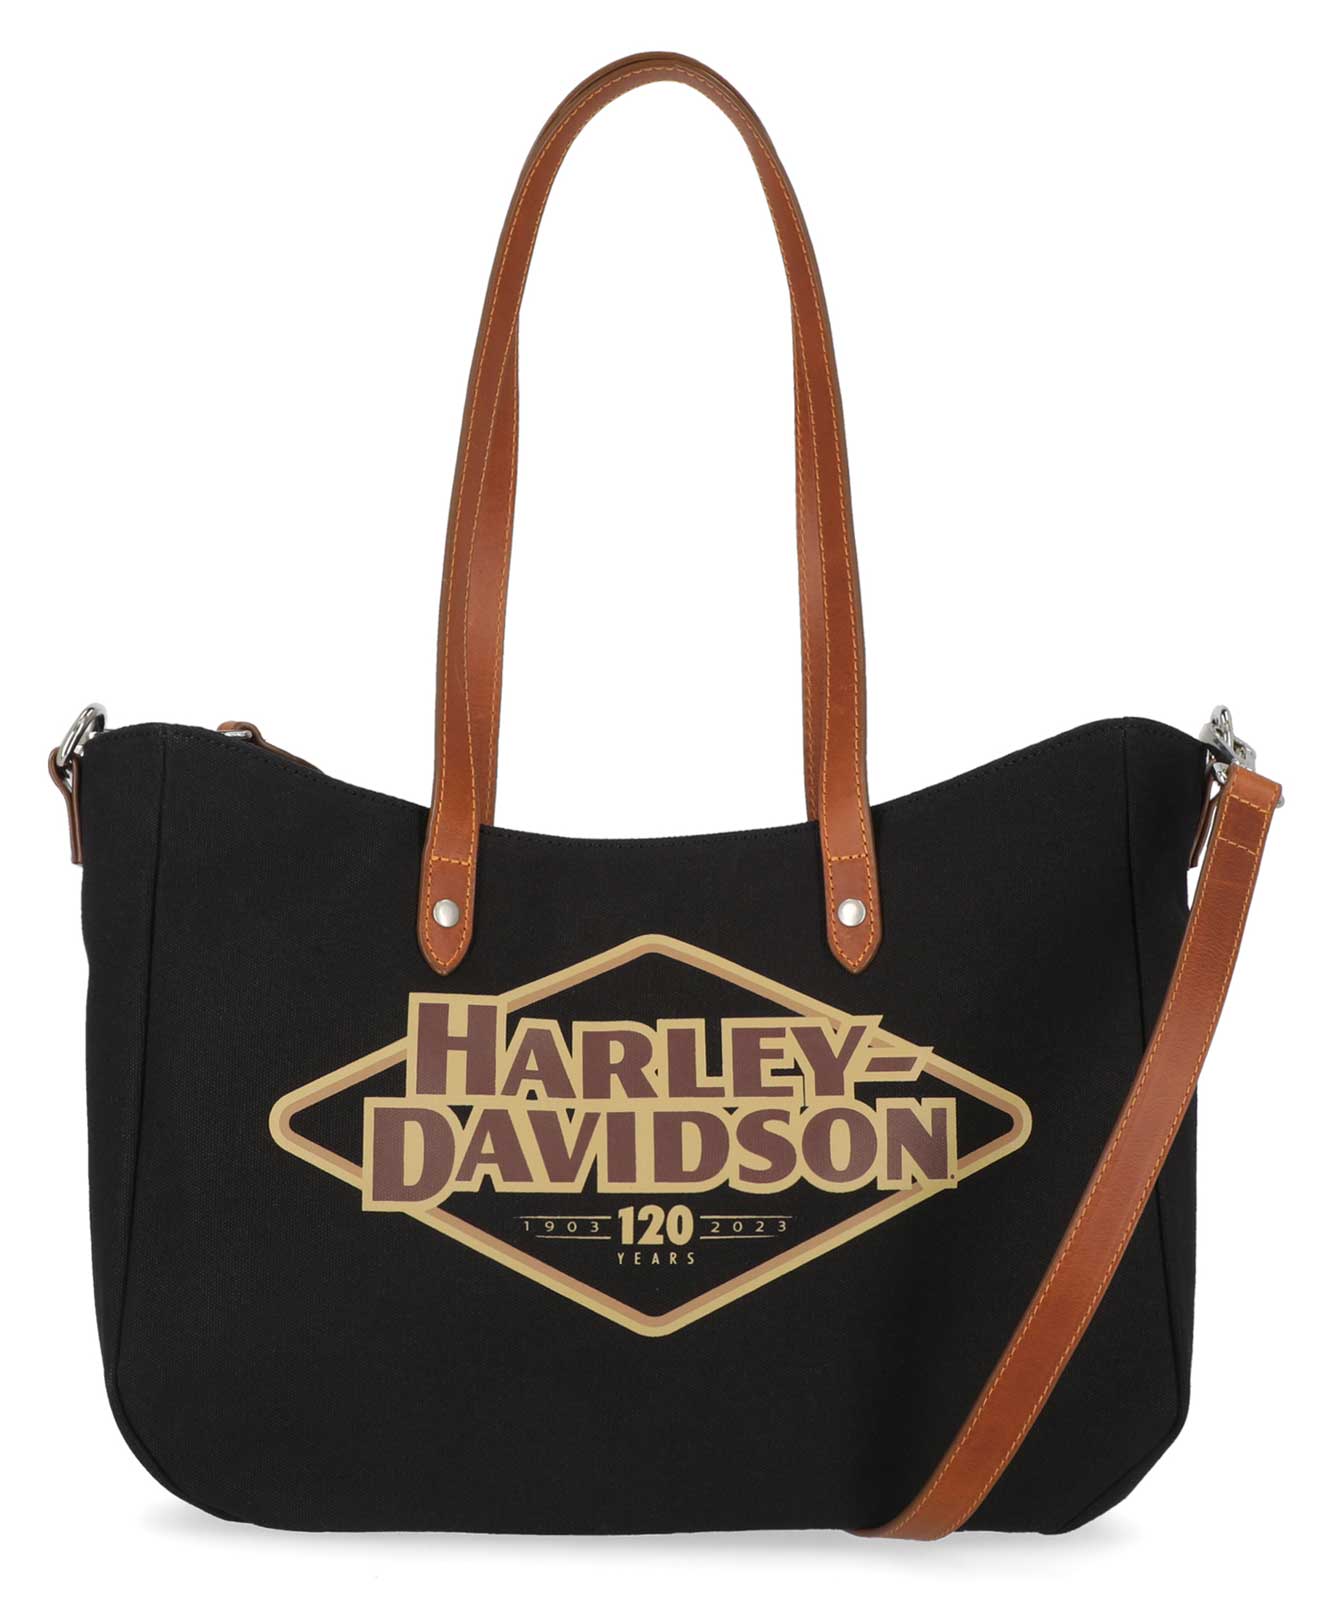 Harley Davidson Tote Bag - clothing & accessories - by owner